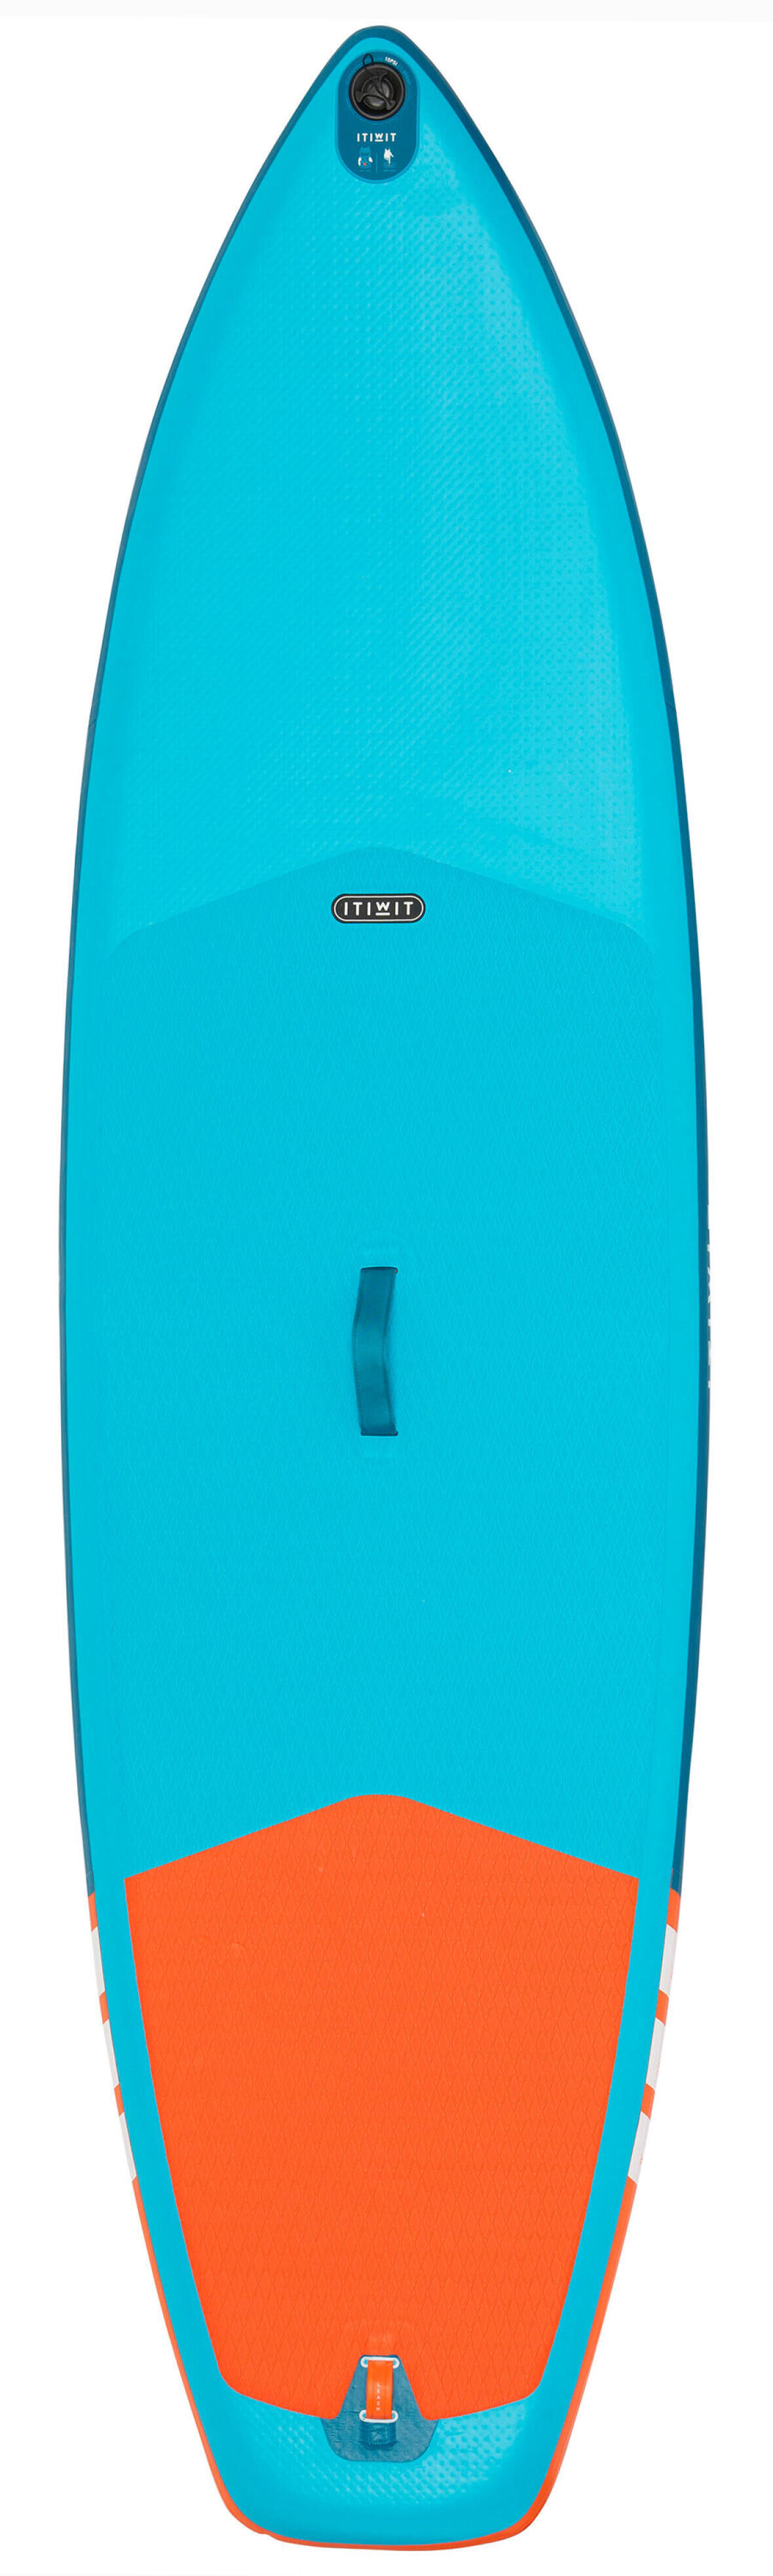 decathlon-itiwit-inflatable-sup-x100-9-blue